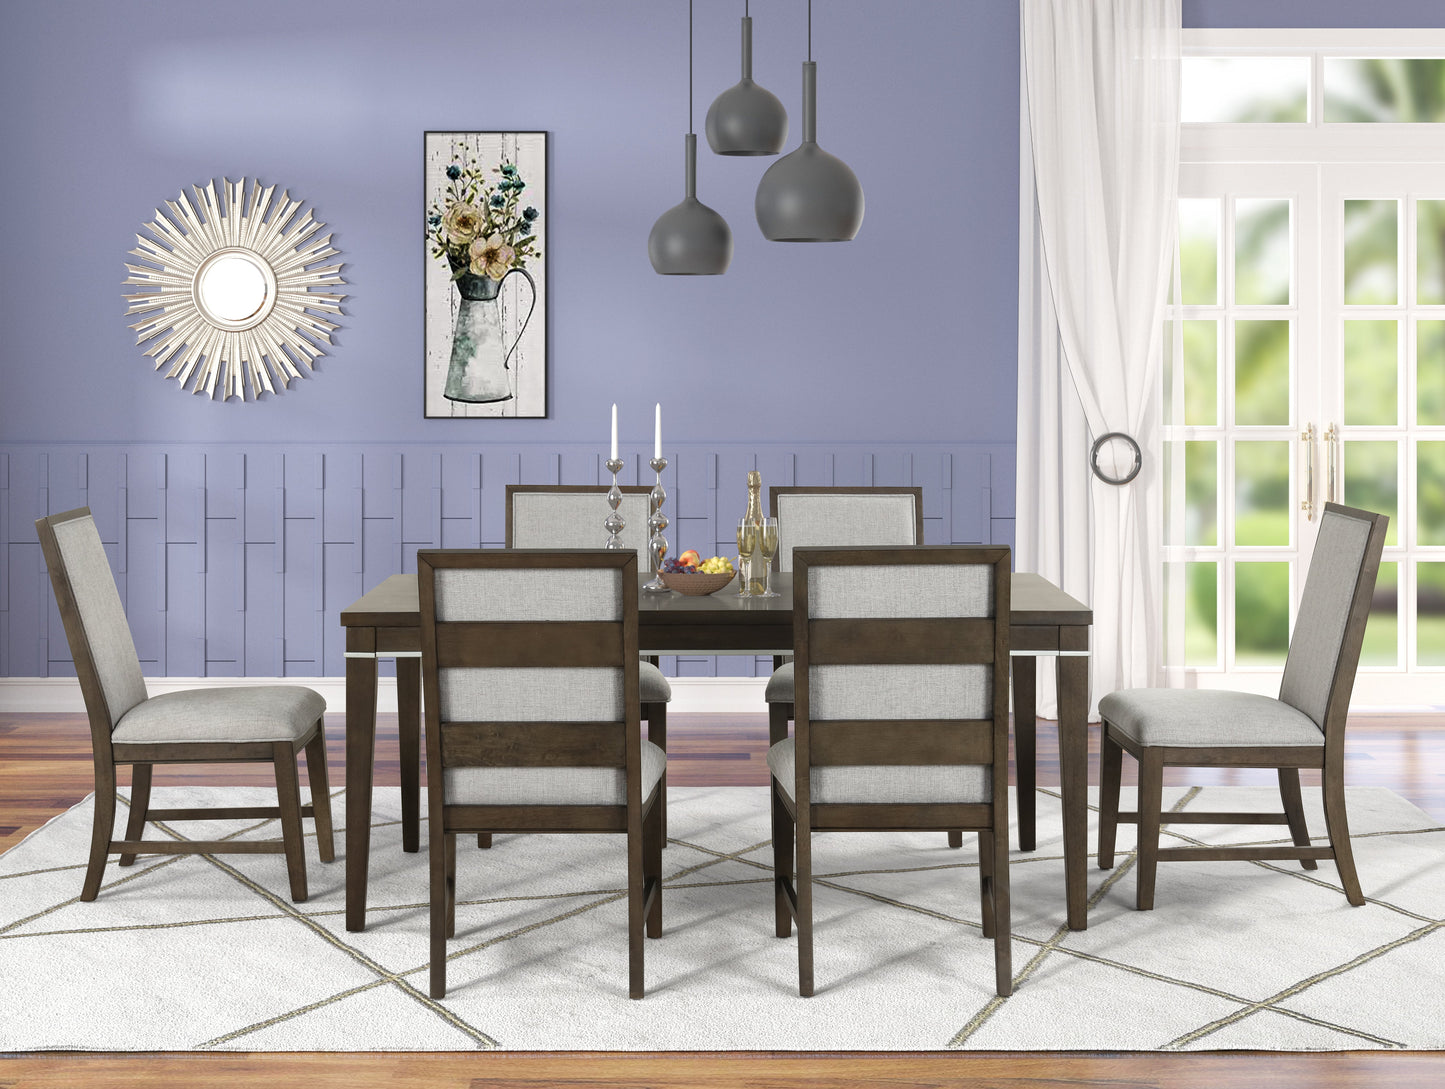 Roundhill Furniture Aberll Wood Dining Room Set, Table with 6 Side Chairs, Gray